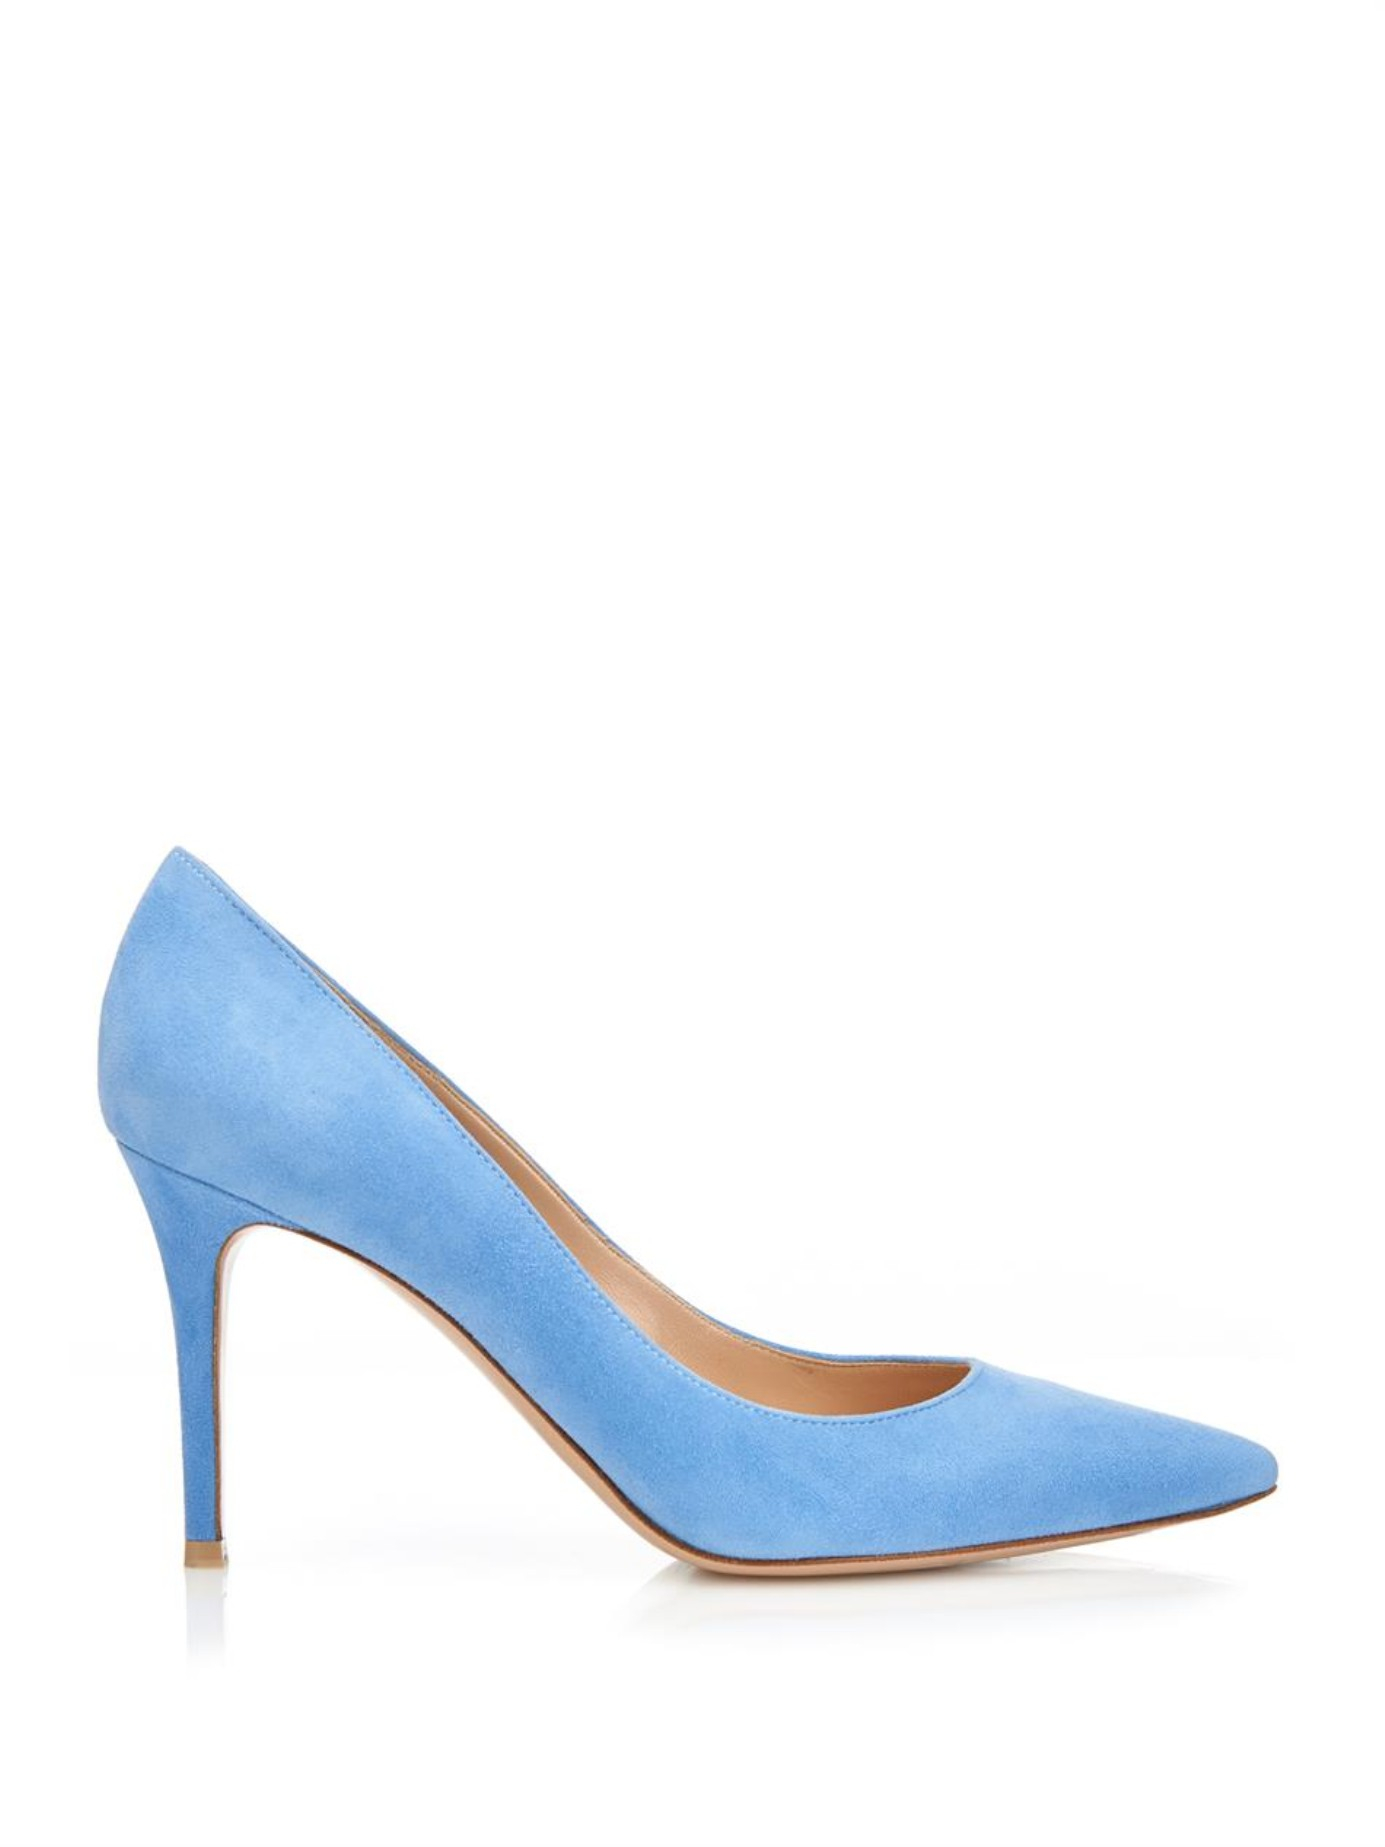 Gianvito Rossi Business Point-Toe Suede Pumps in Light Blue (Blue) | Lyst